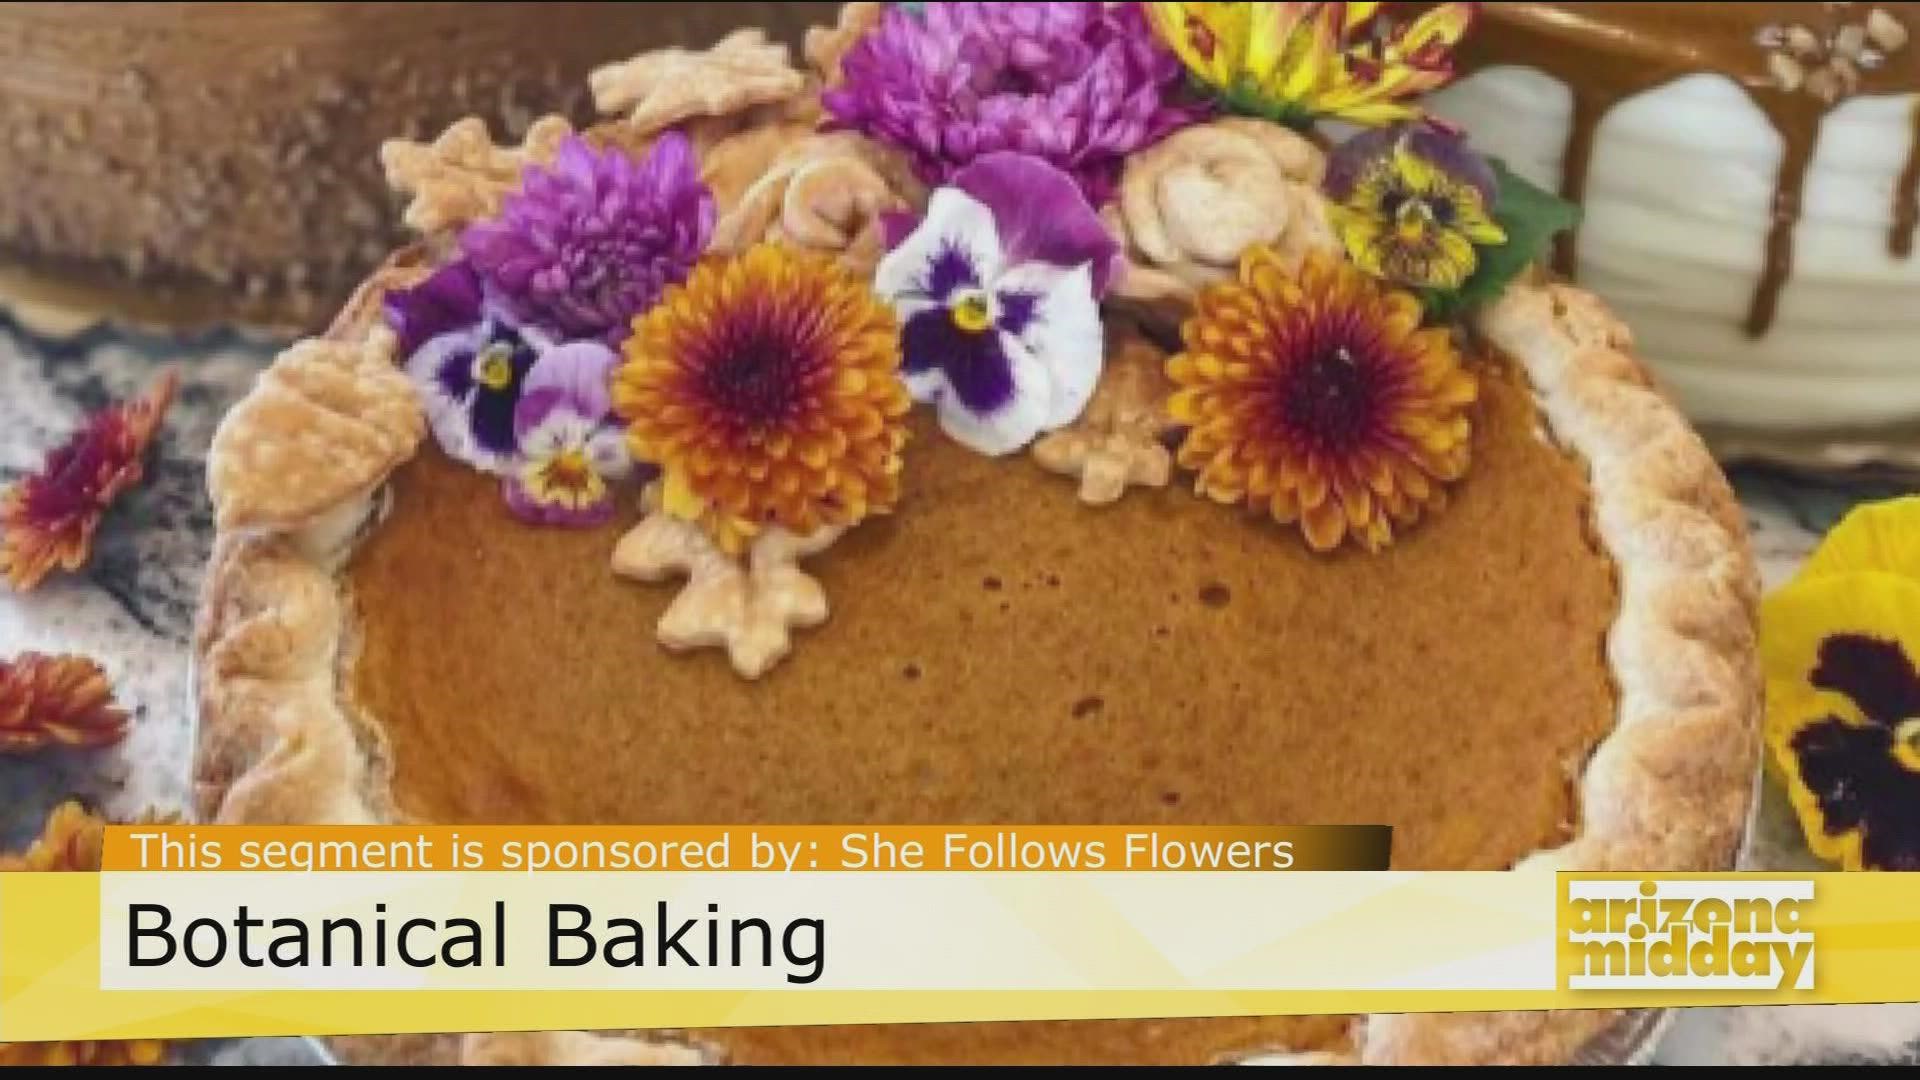 Kristi Belk, a flower influencer and enthusiast, shares how edible flowers can turn your pie in a Thanksgiving table centerpiece.